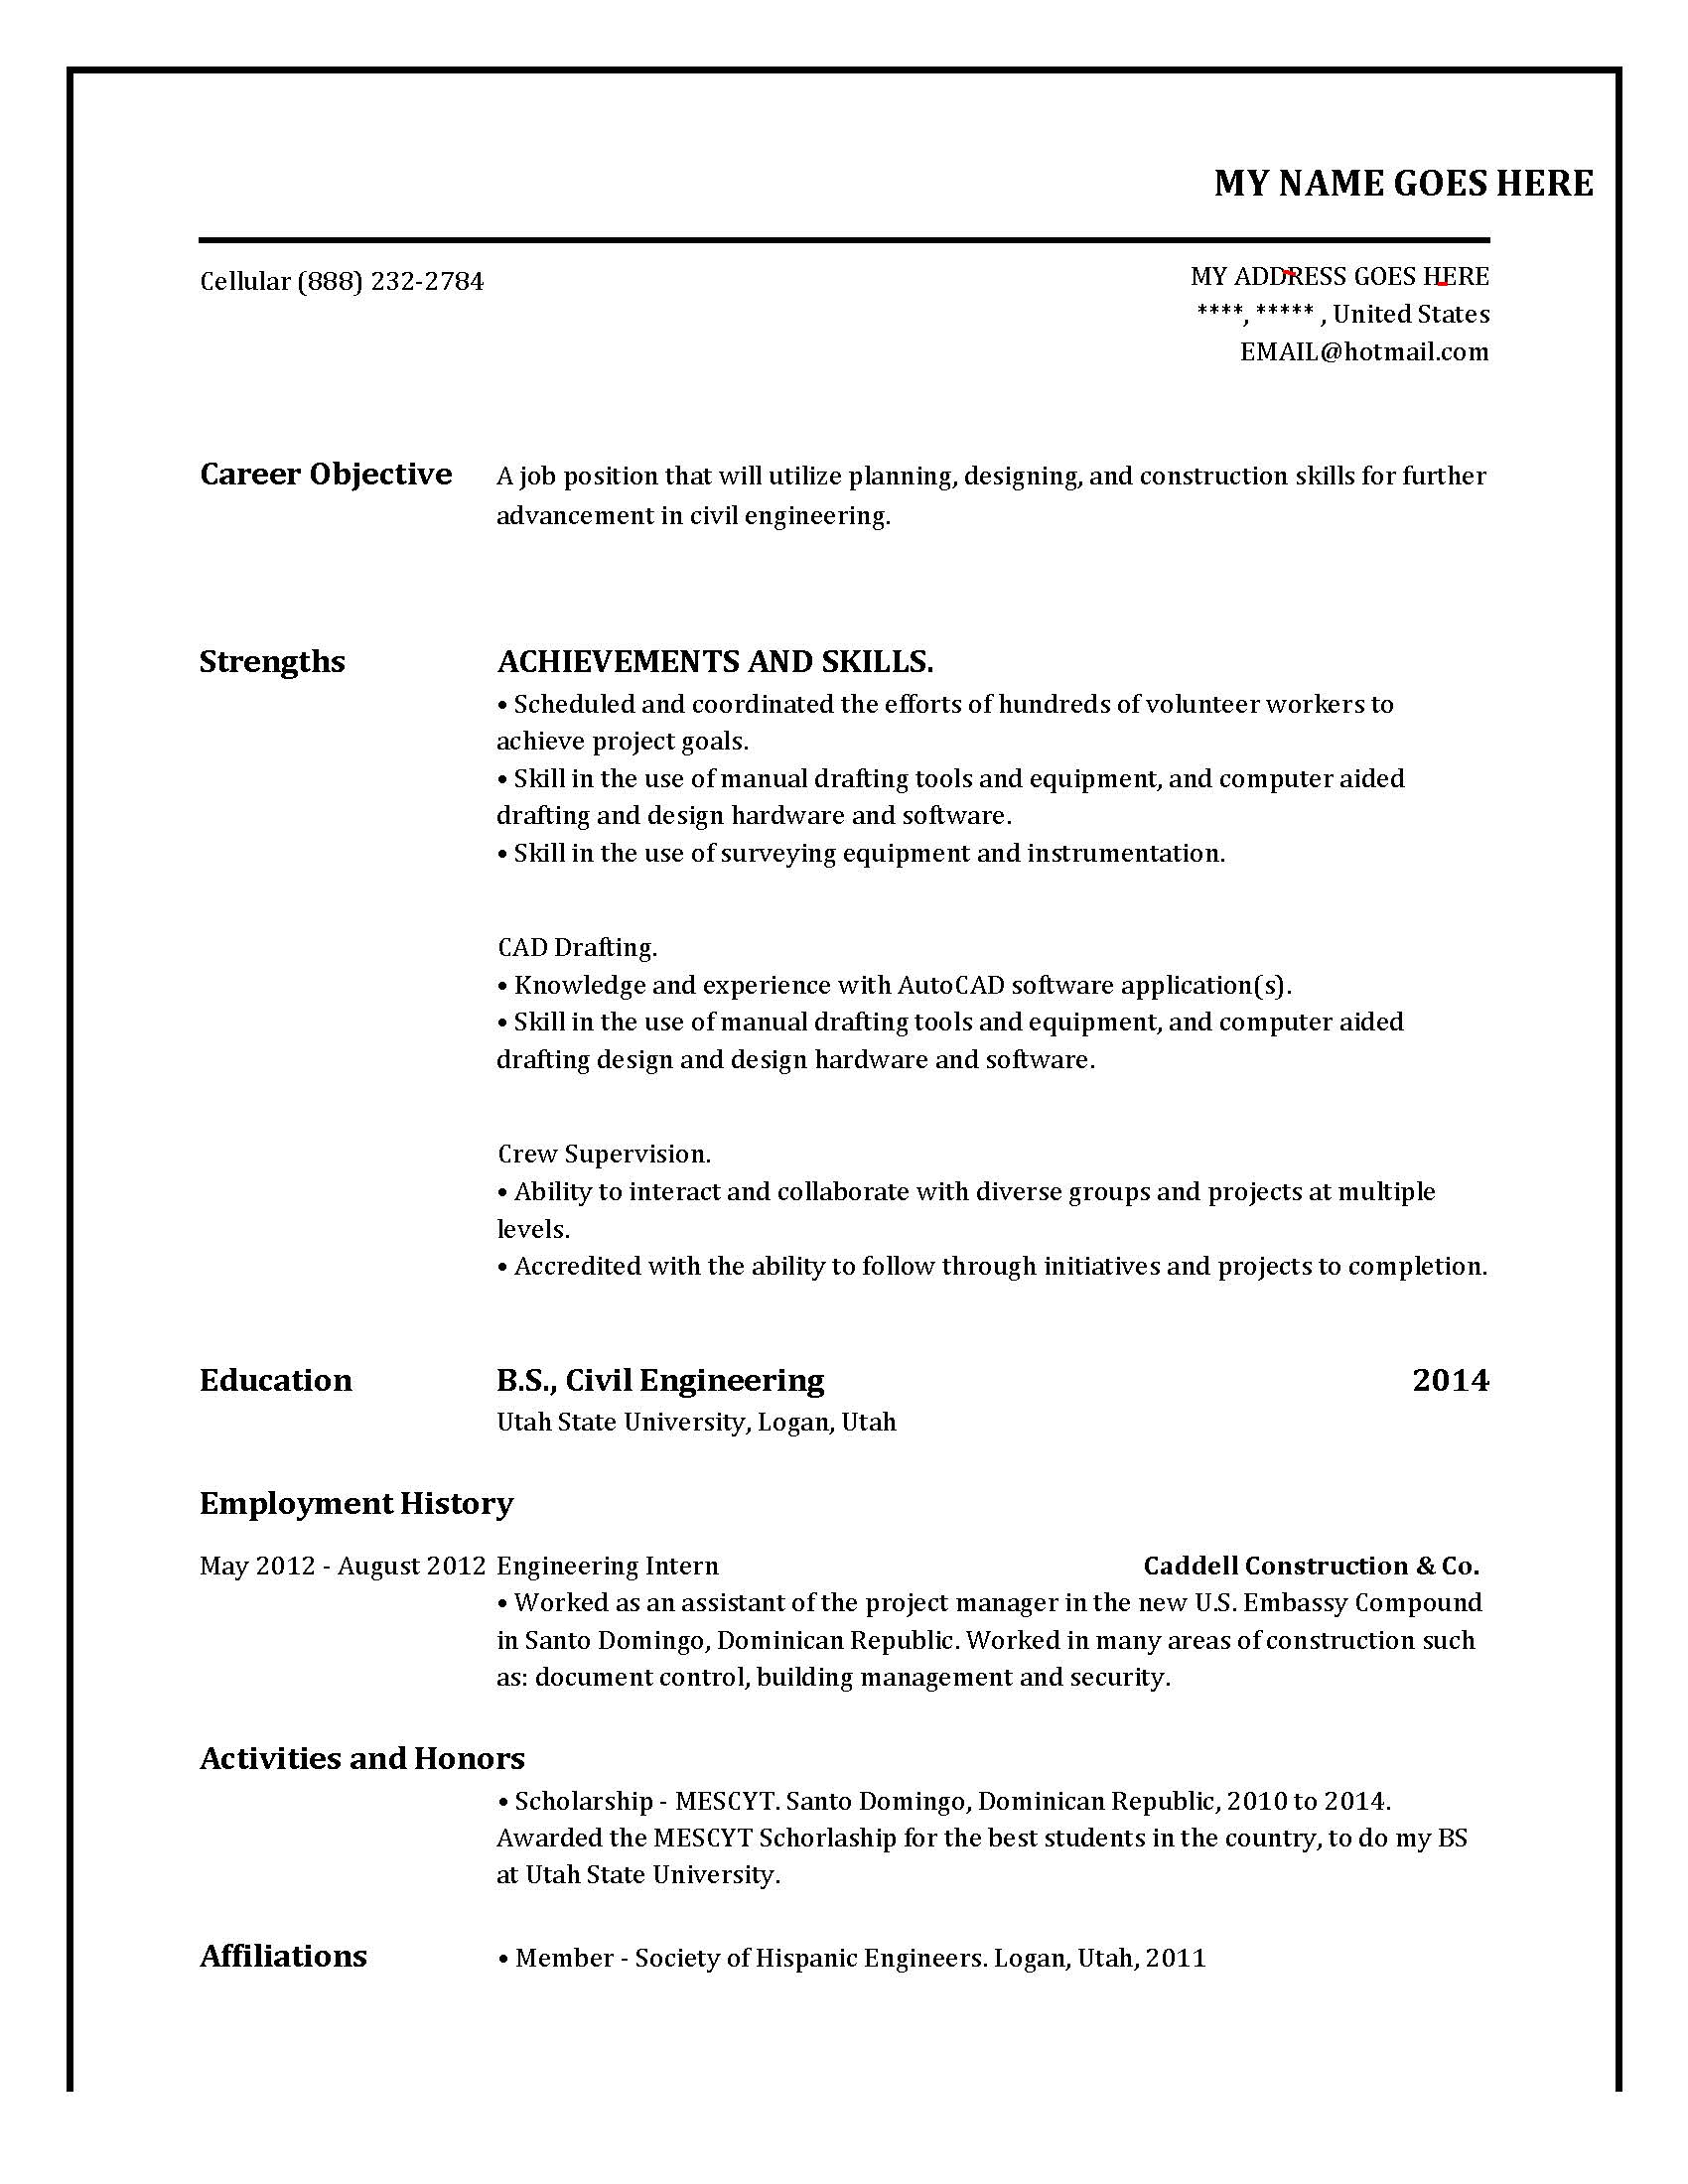 Top 10 Websites To Look For resume